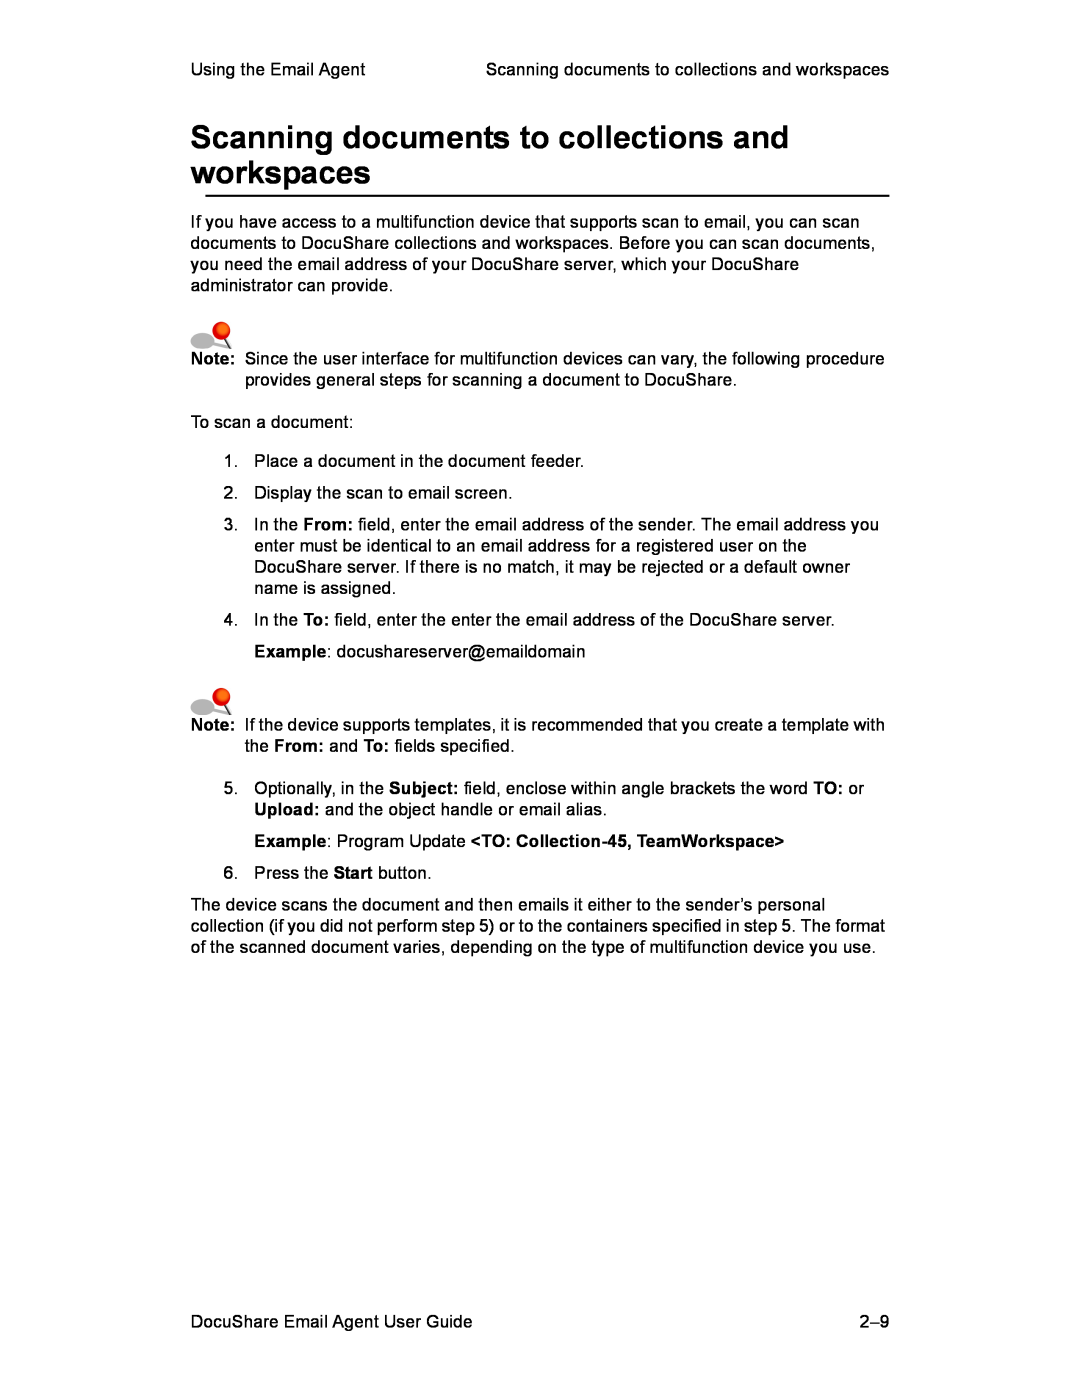 Xerox DocuShare 6.0 manual Scanning documents to collections and workspaces 